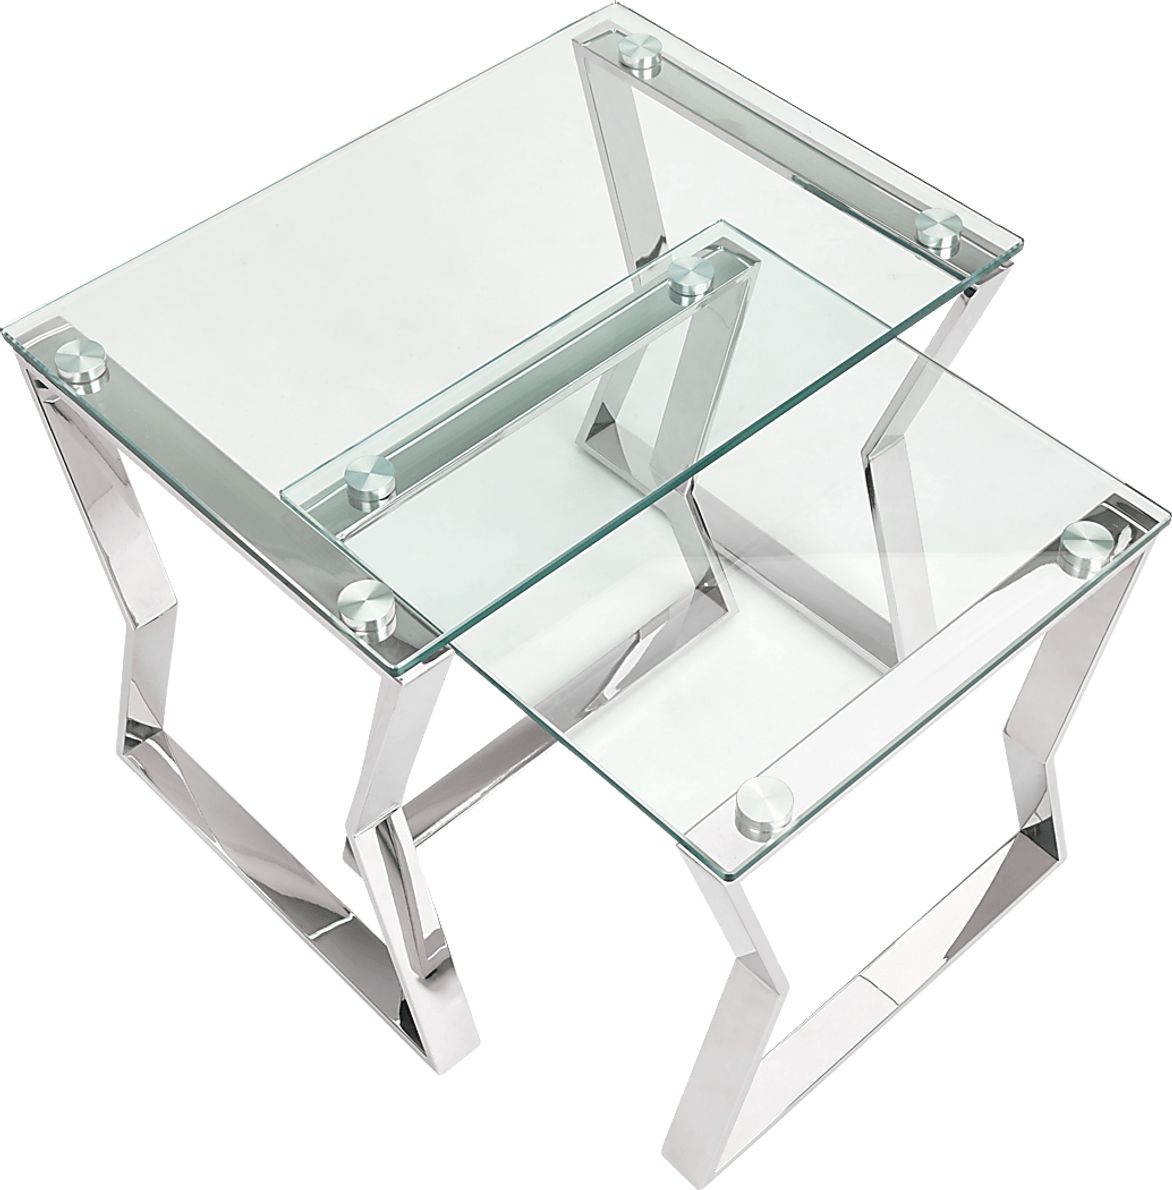 Sahalee Silver Nesting Tables - Rooms To Go